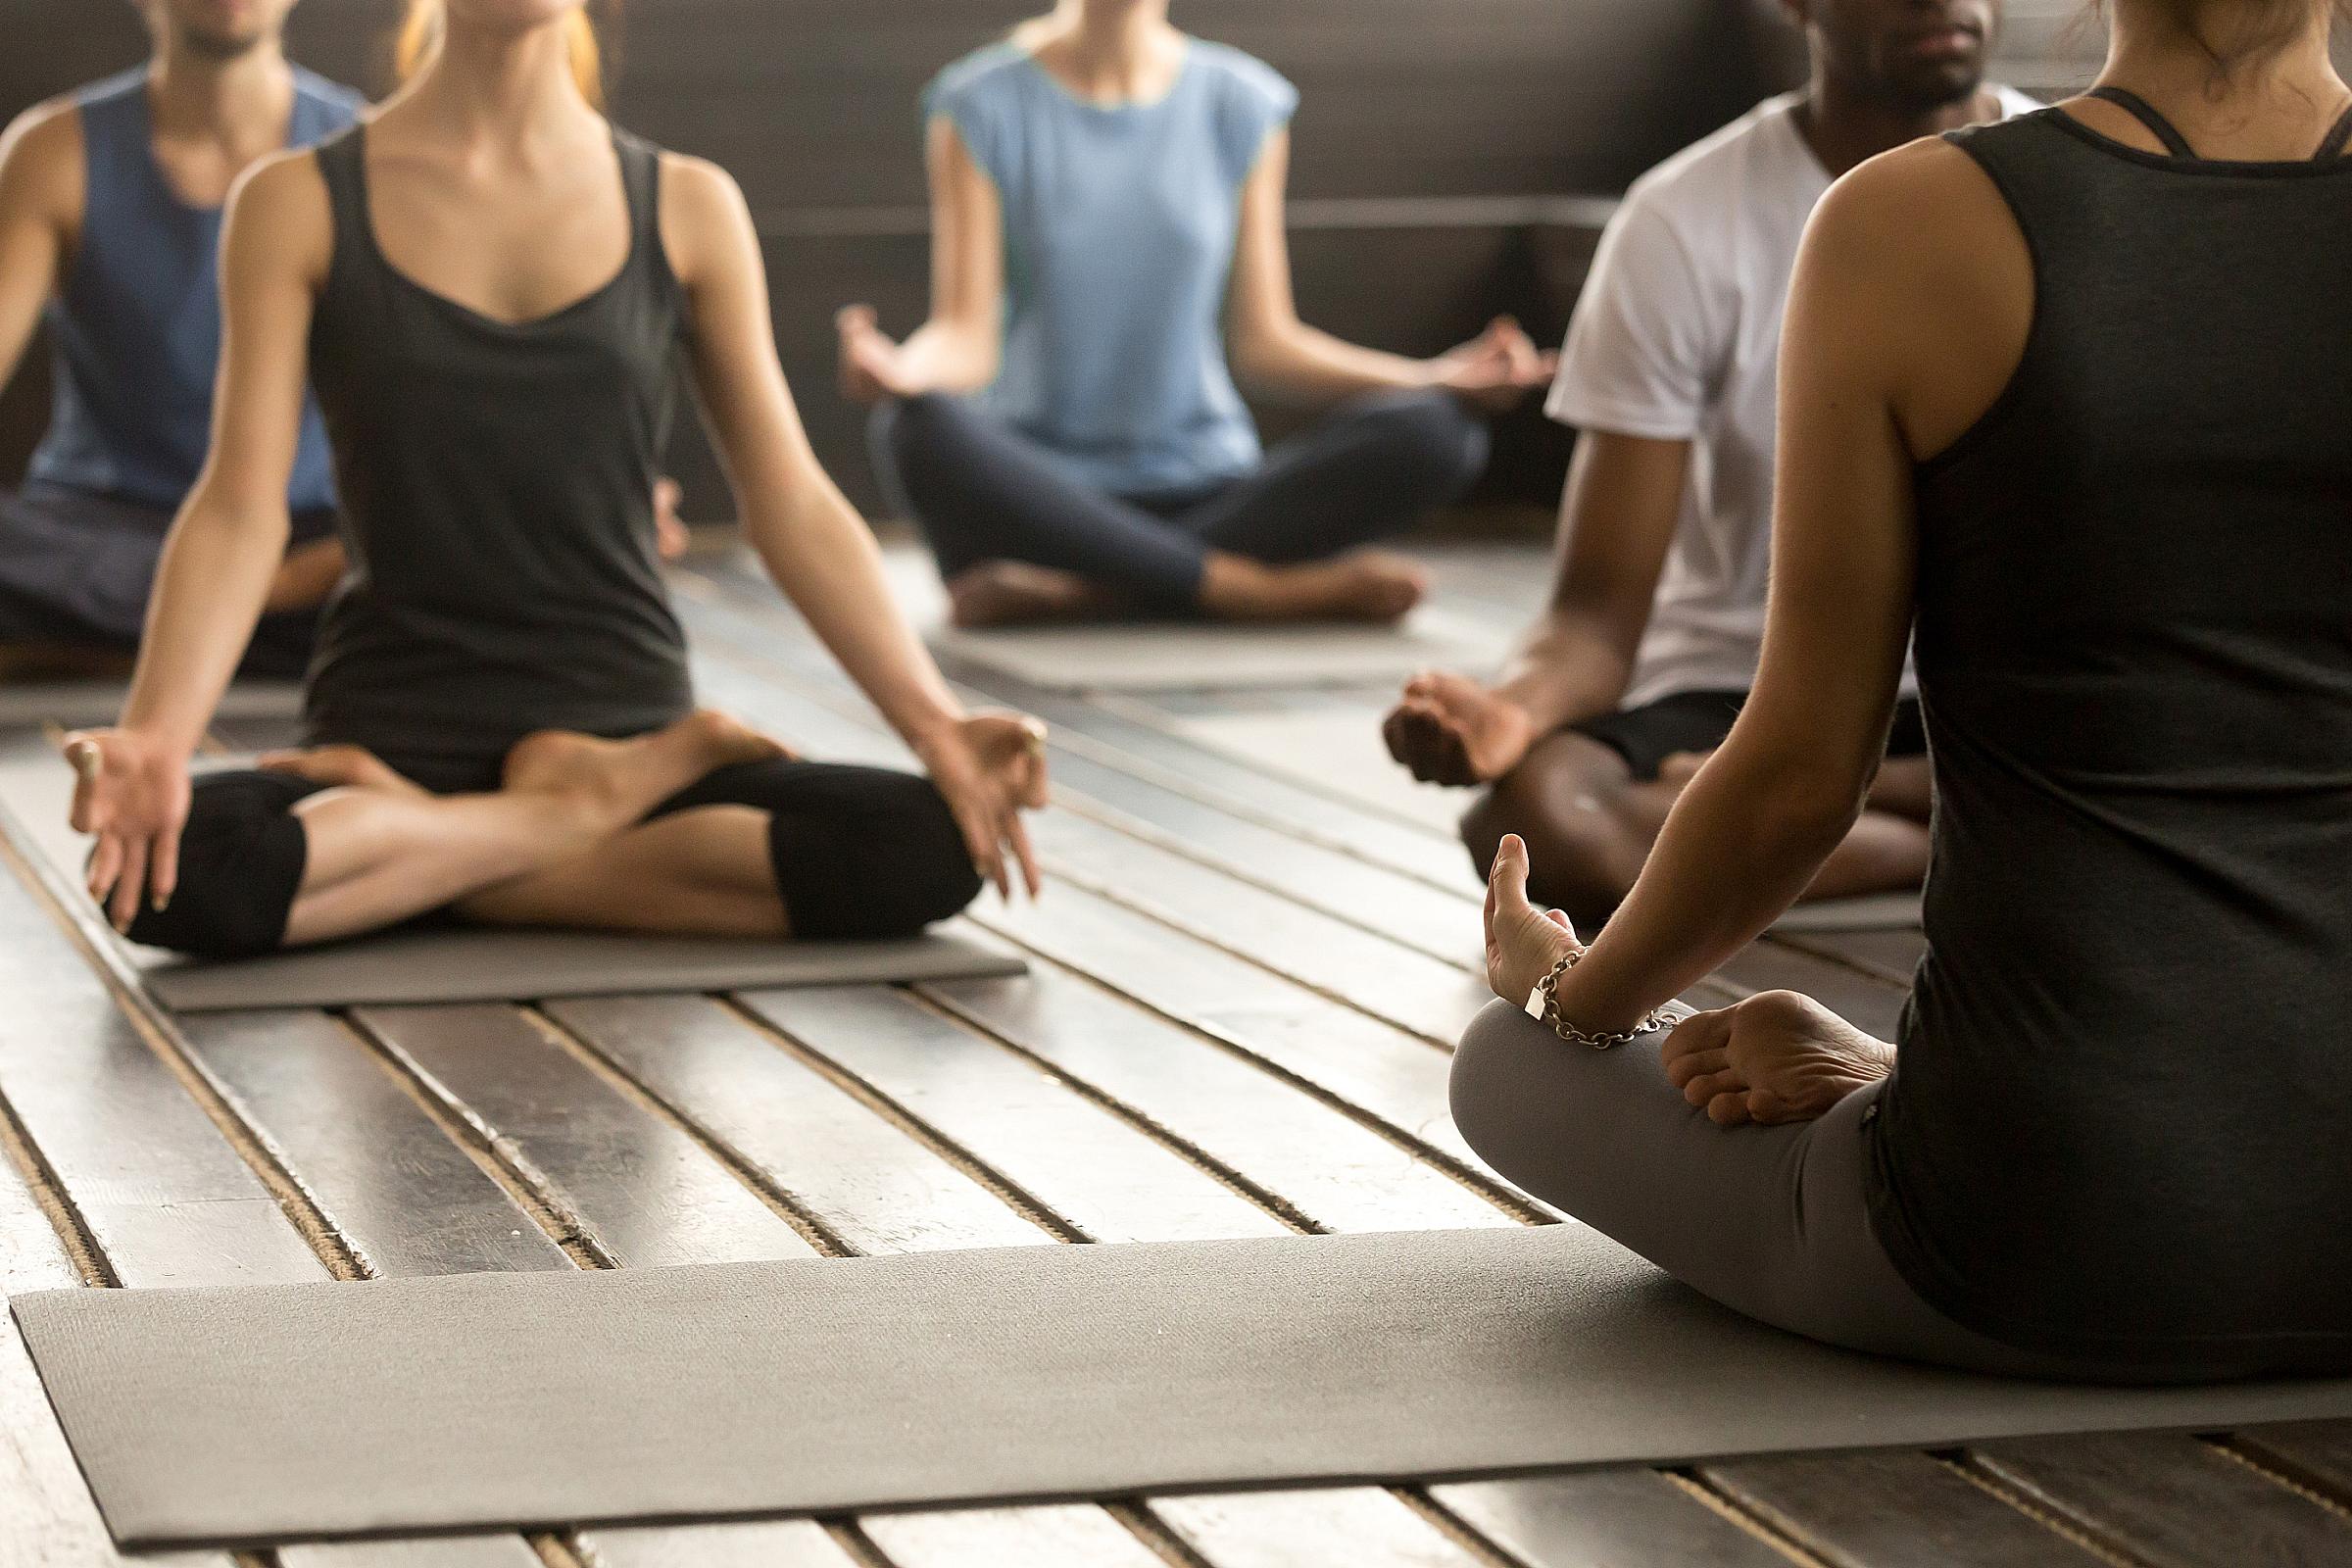 Group of people sitting on yoga mats in a studio